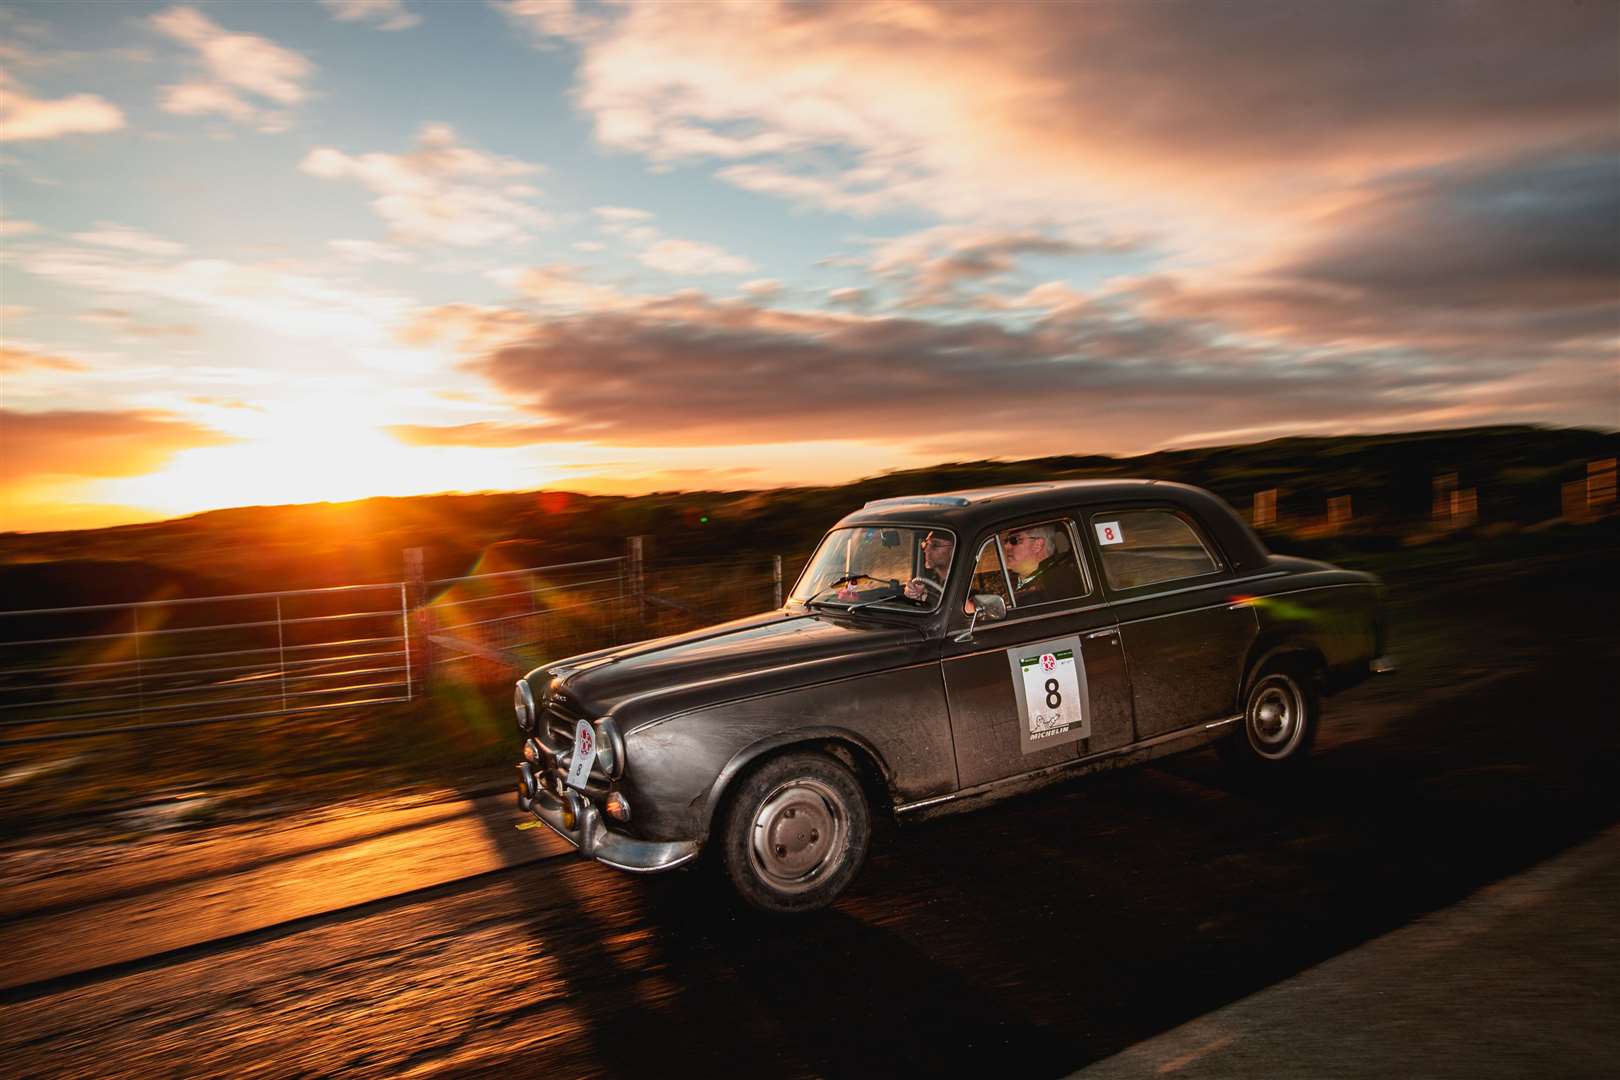 Leg five of the Lejog run with Peugeot 403 number 8 driven by Michiel van der Velden (NL) and Pieter Hennipman (NL). Picture: Will Broadhead